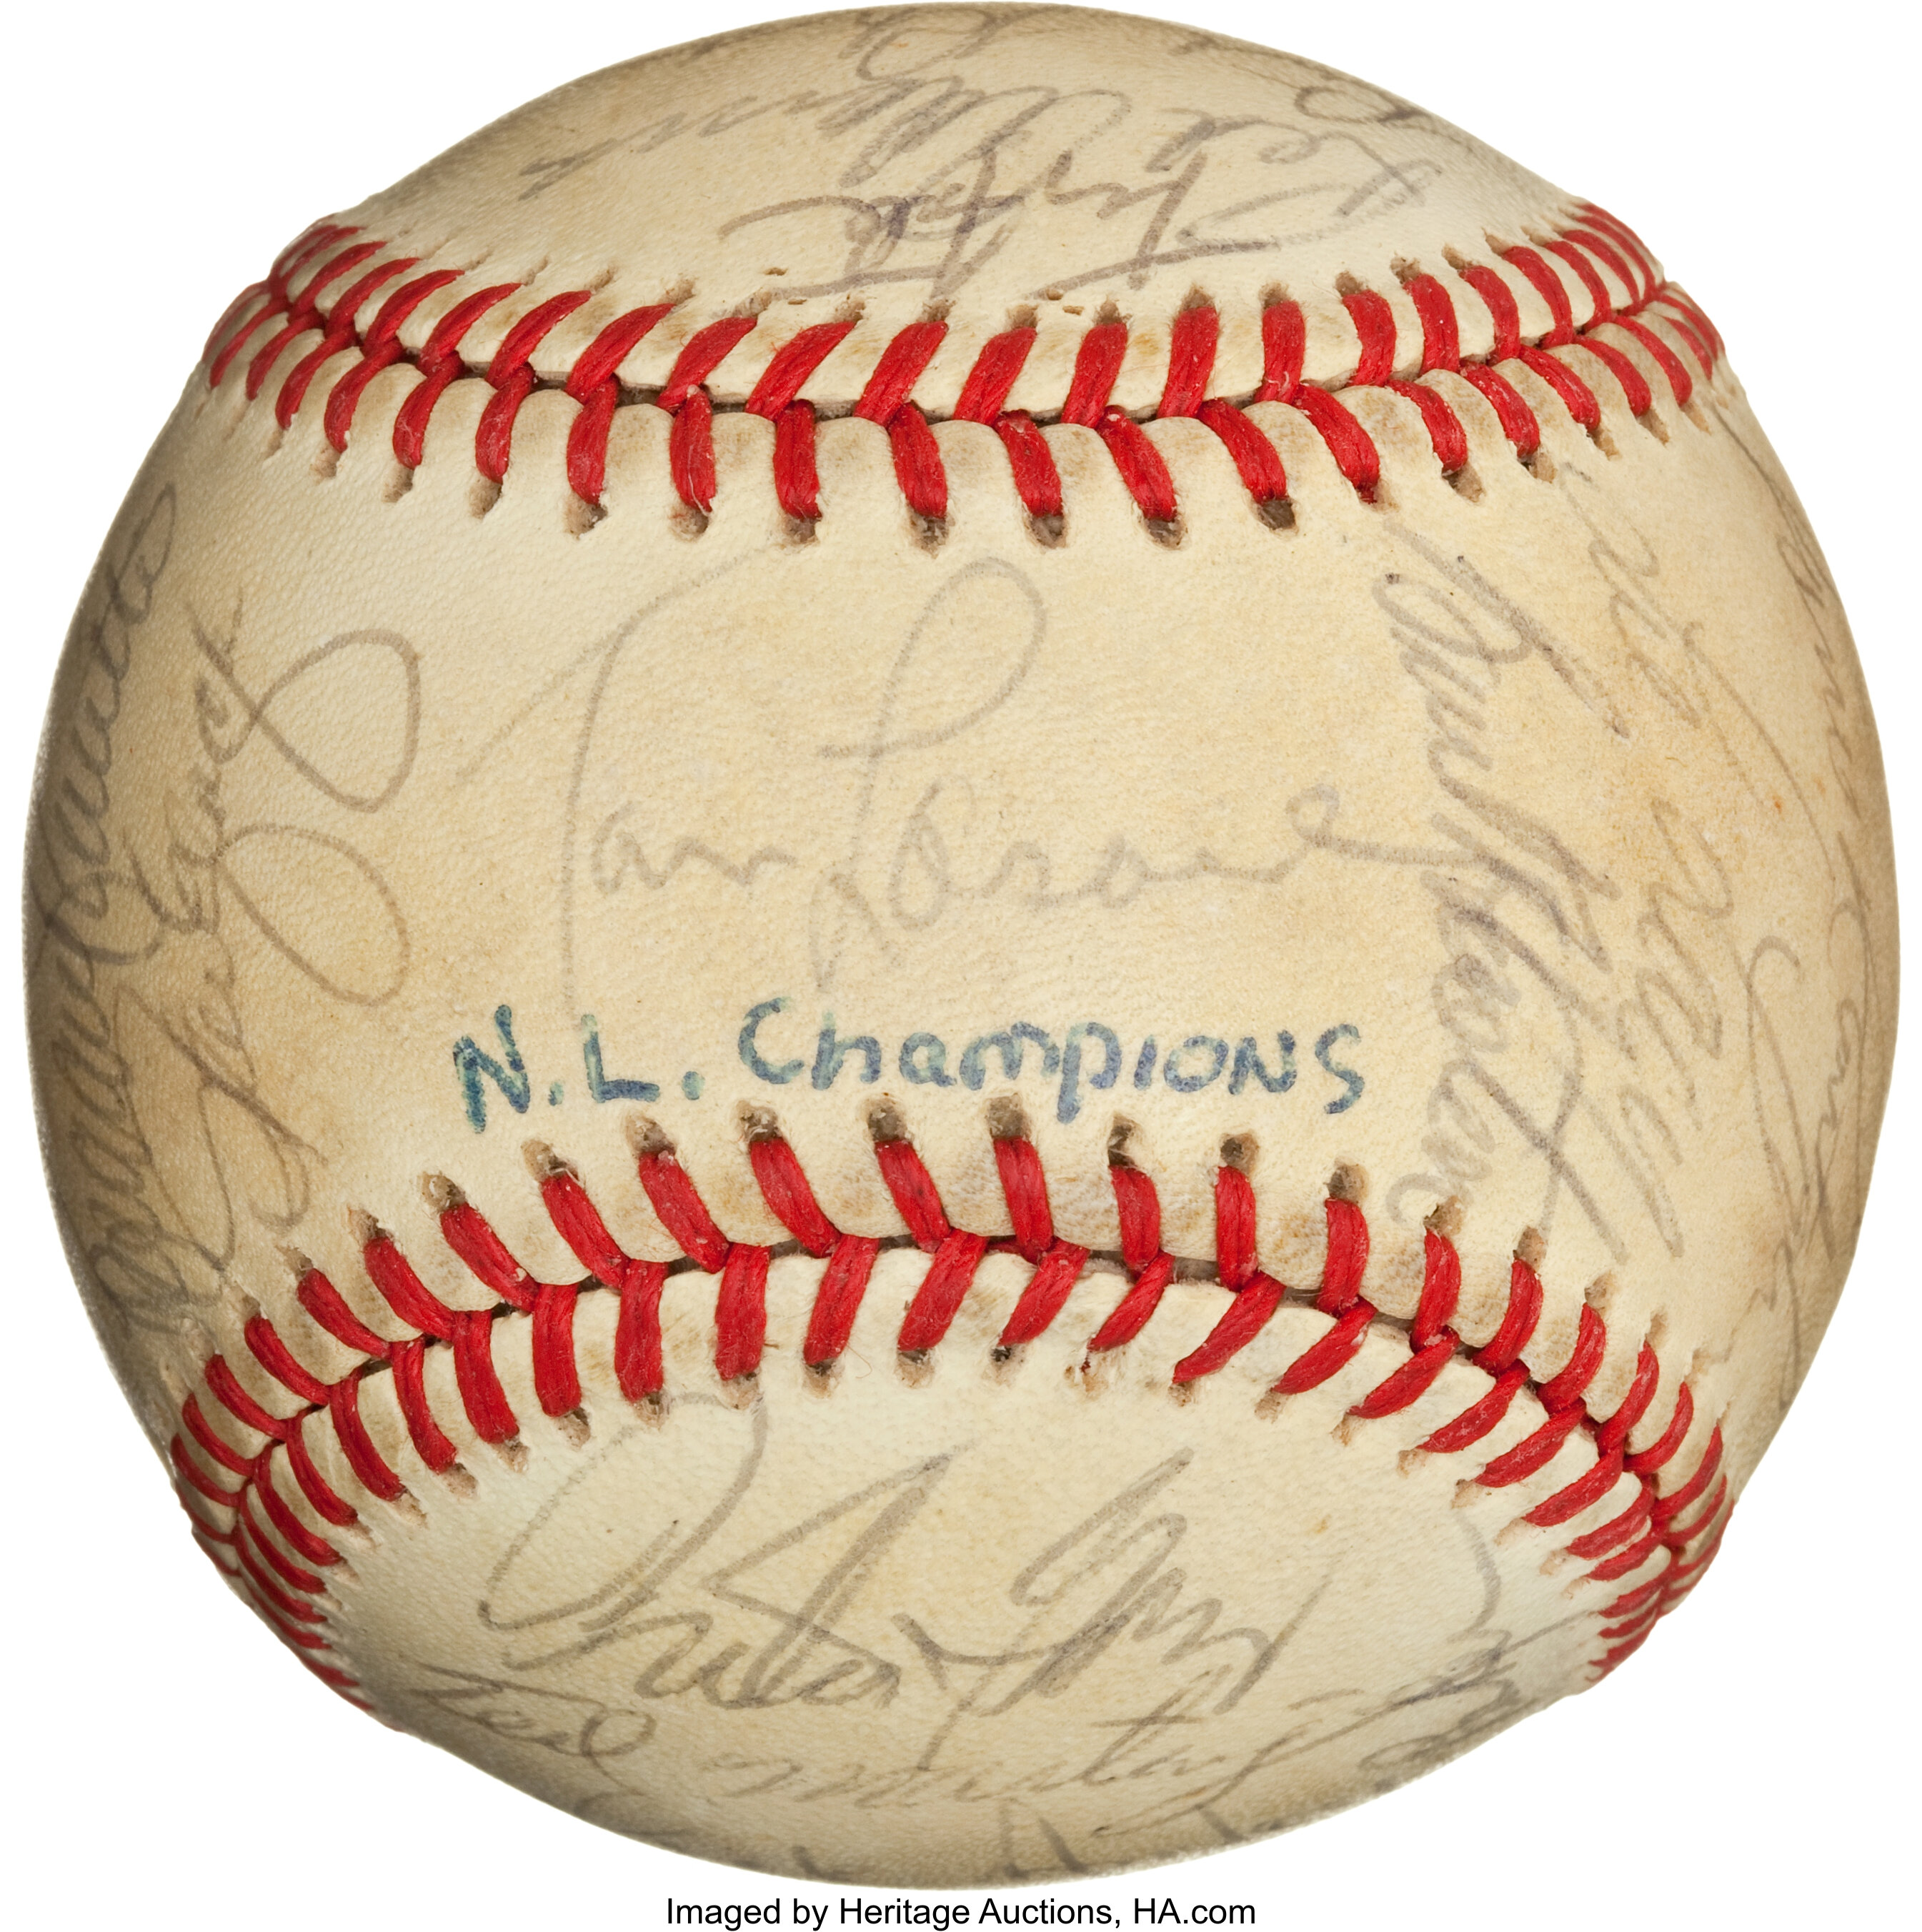 Los Angeles Dodgers Foundation - Bid on game-used and autographed